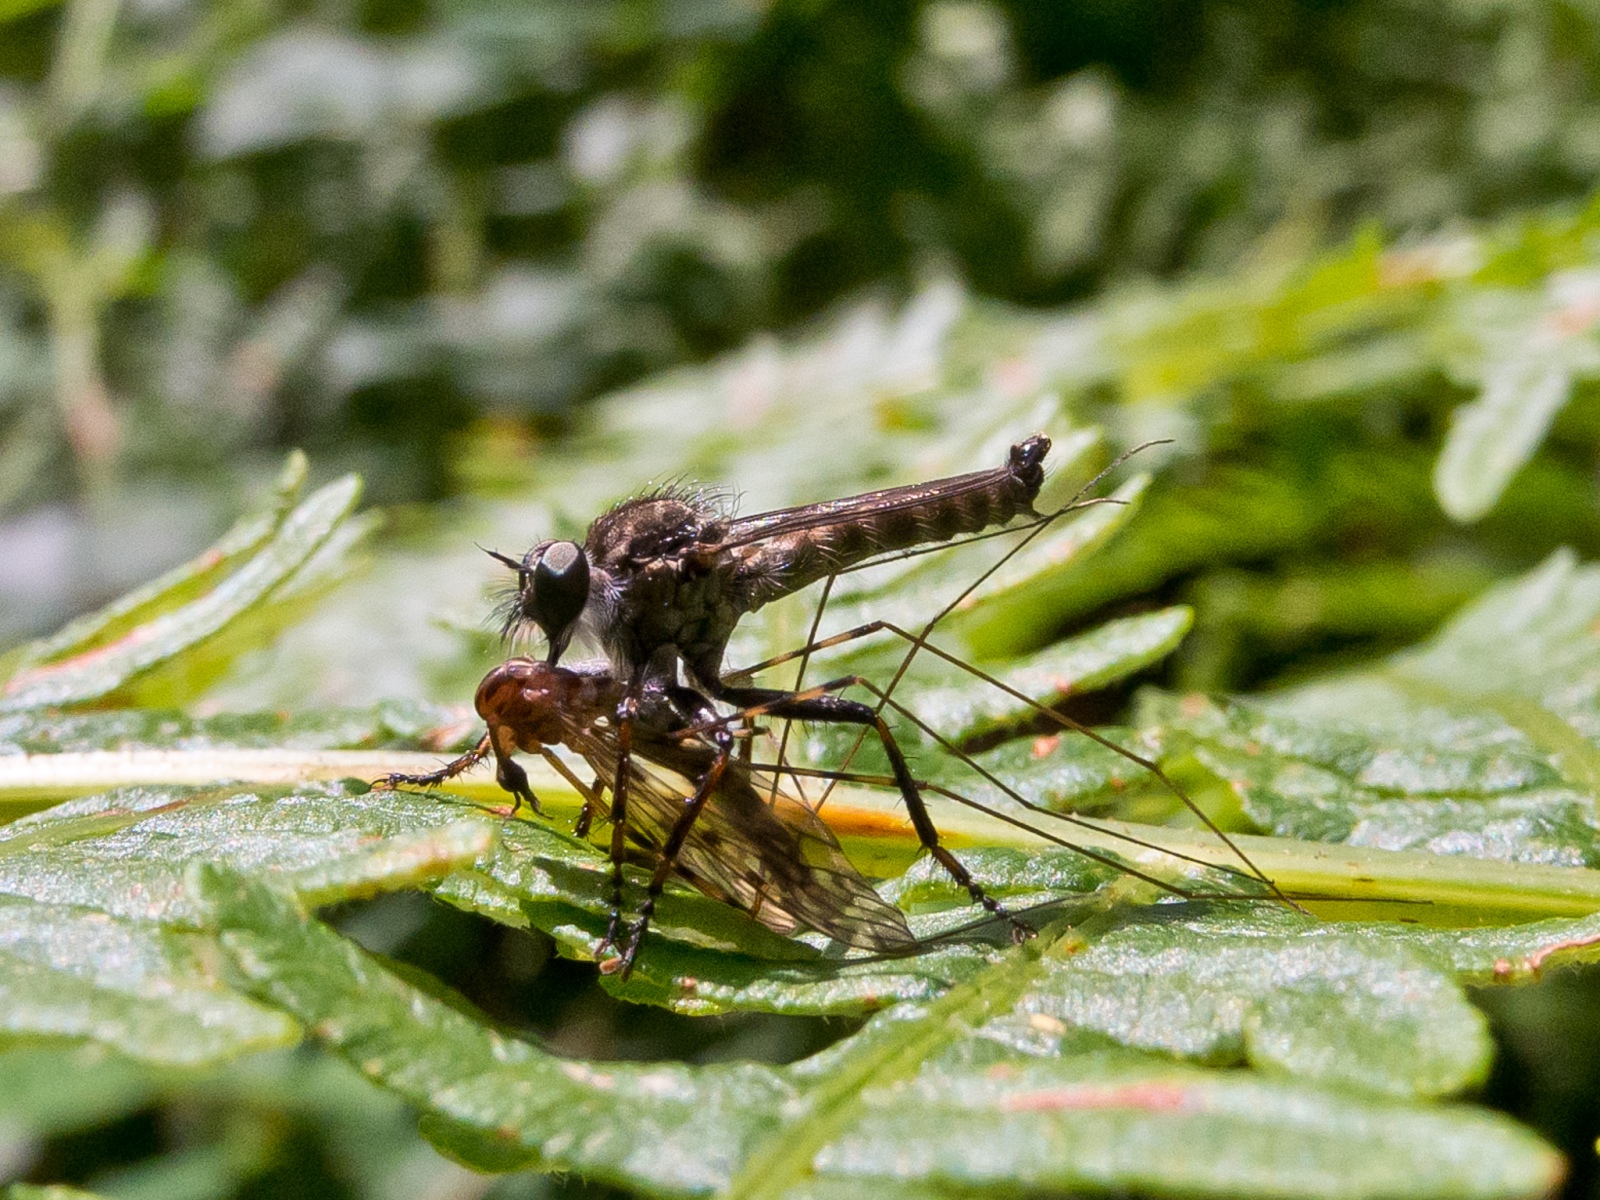 Dysmachus trigonus - Robber fly with prey, Clumber Park, Notts